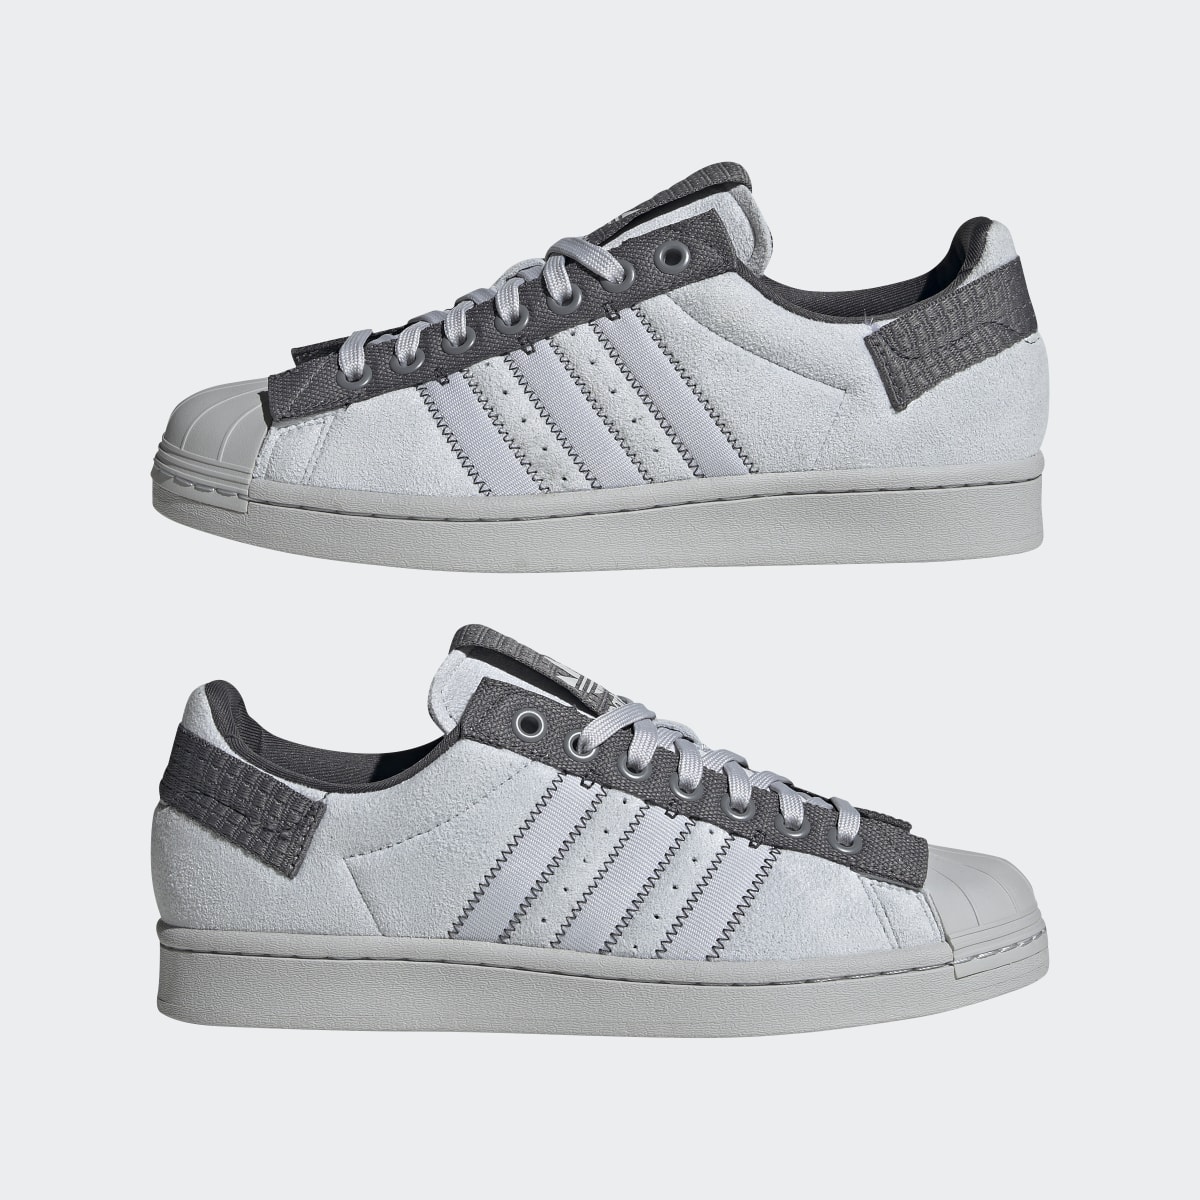 Adidas Superstar Parley Shoes. 11